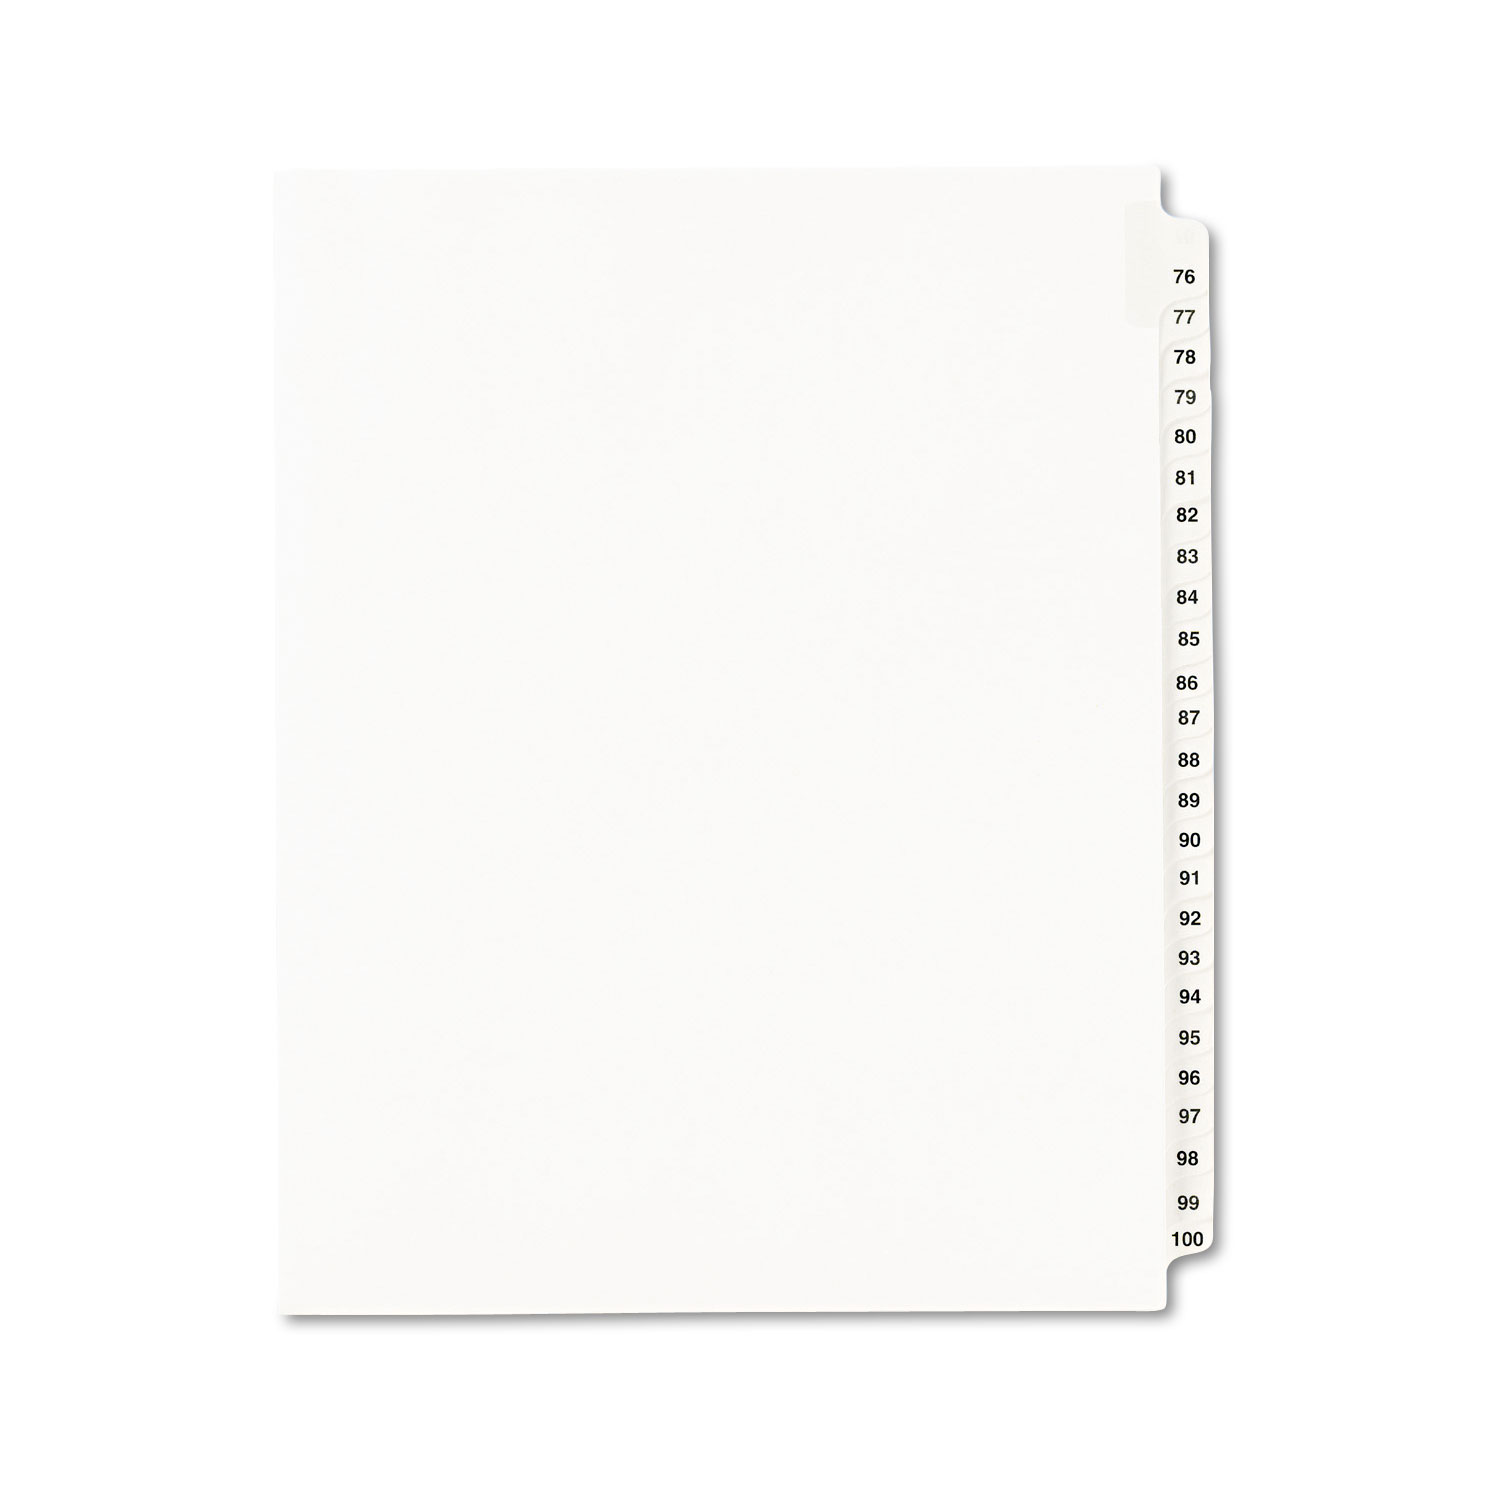  Avery 01333 Preprinted Legal Exhibit Side Tab Index Dividers, Avery Style, 25-Tab, 76 to 100, 11 x 8.5, White, 1 Set (AVE01333) 